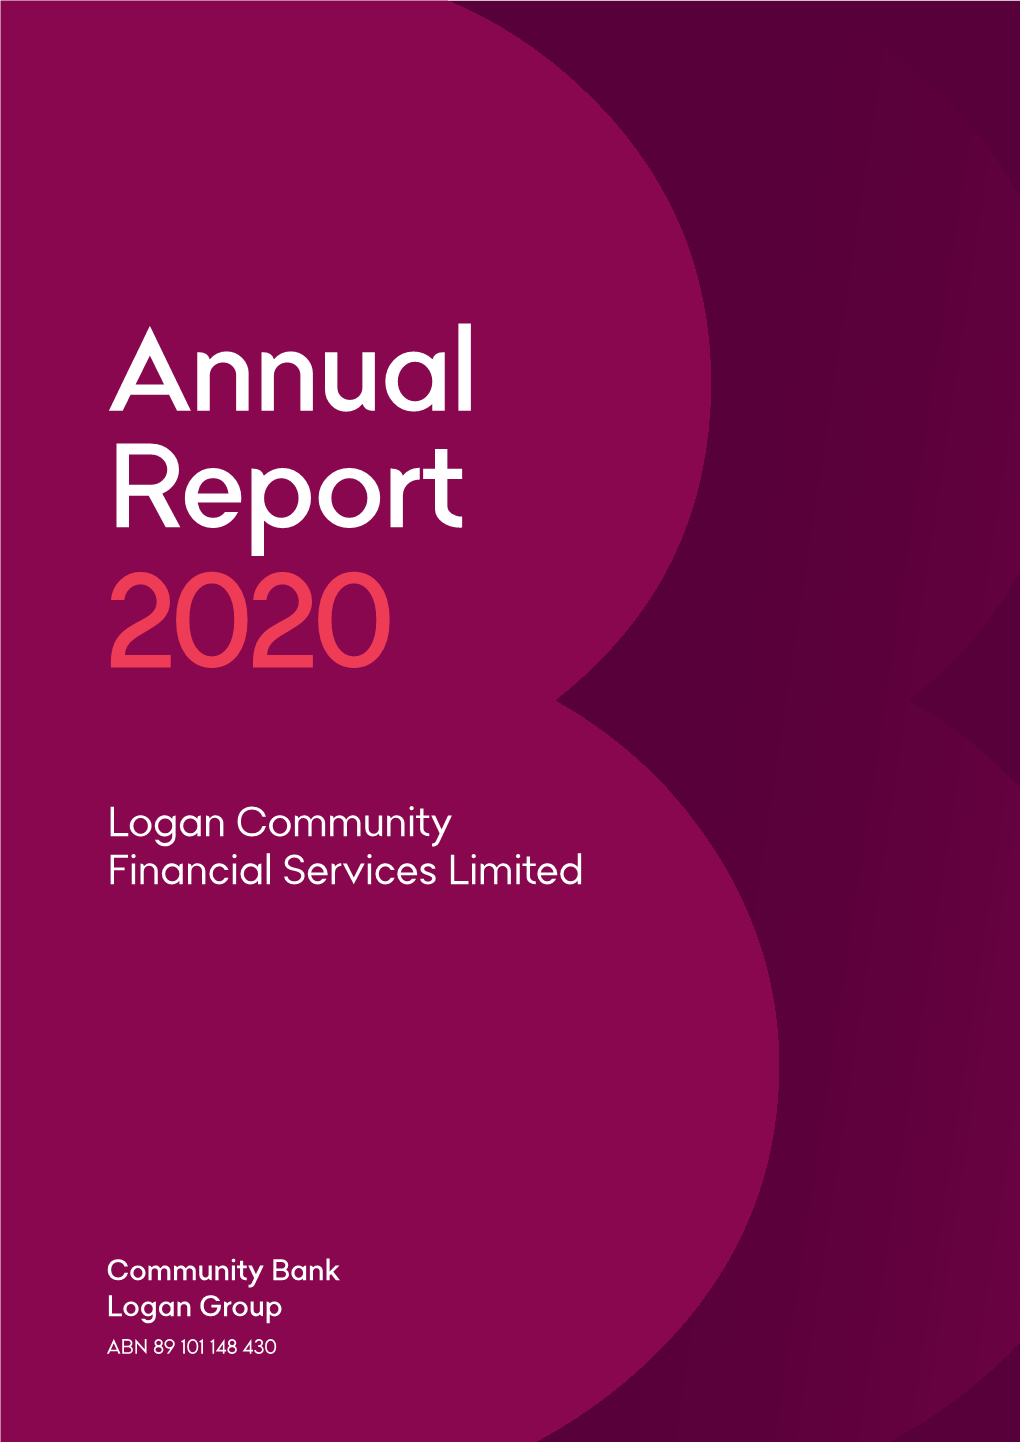 Logan Community Financial Services Limited